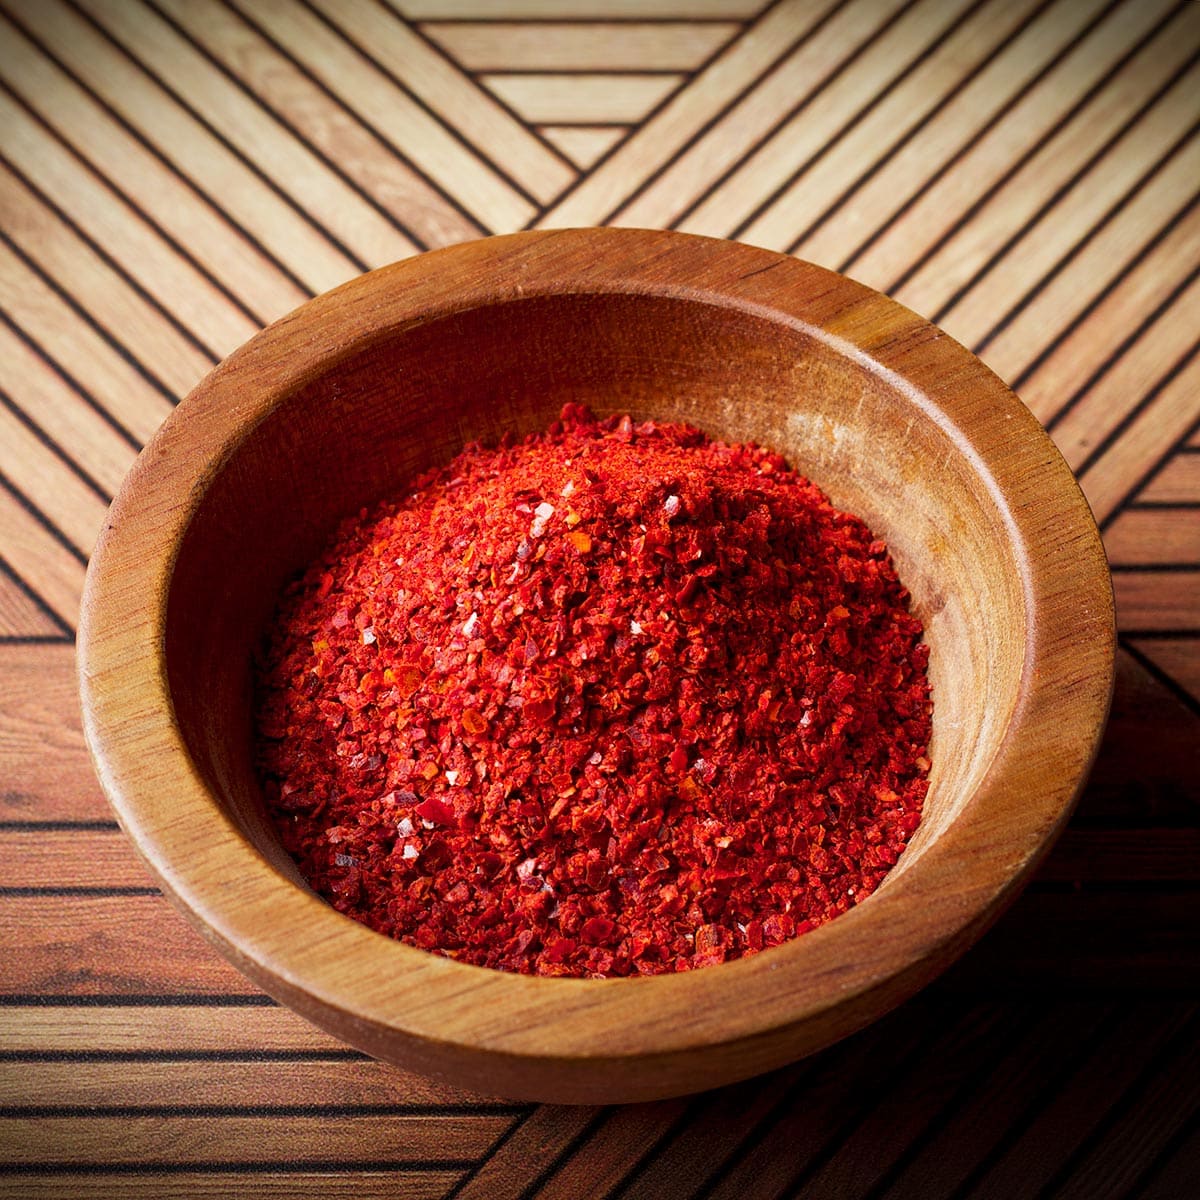 A small wooden bowl containing Aleppo pepper.